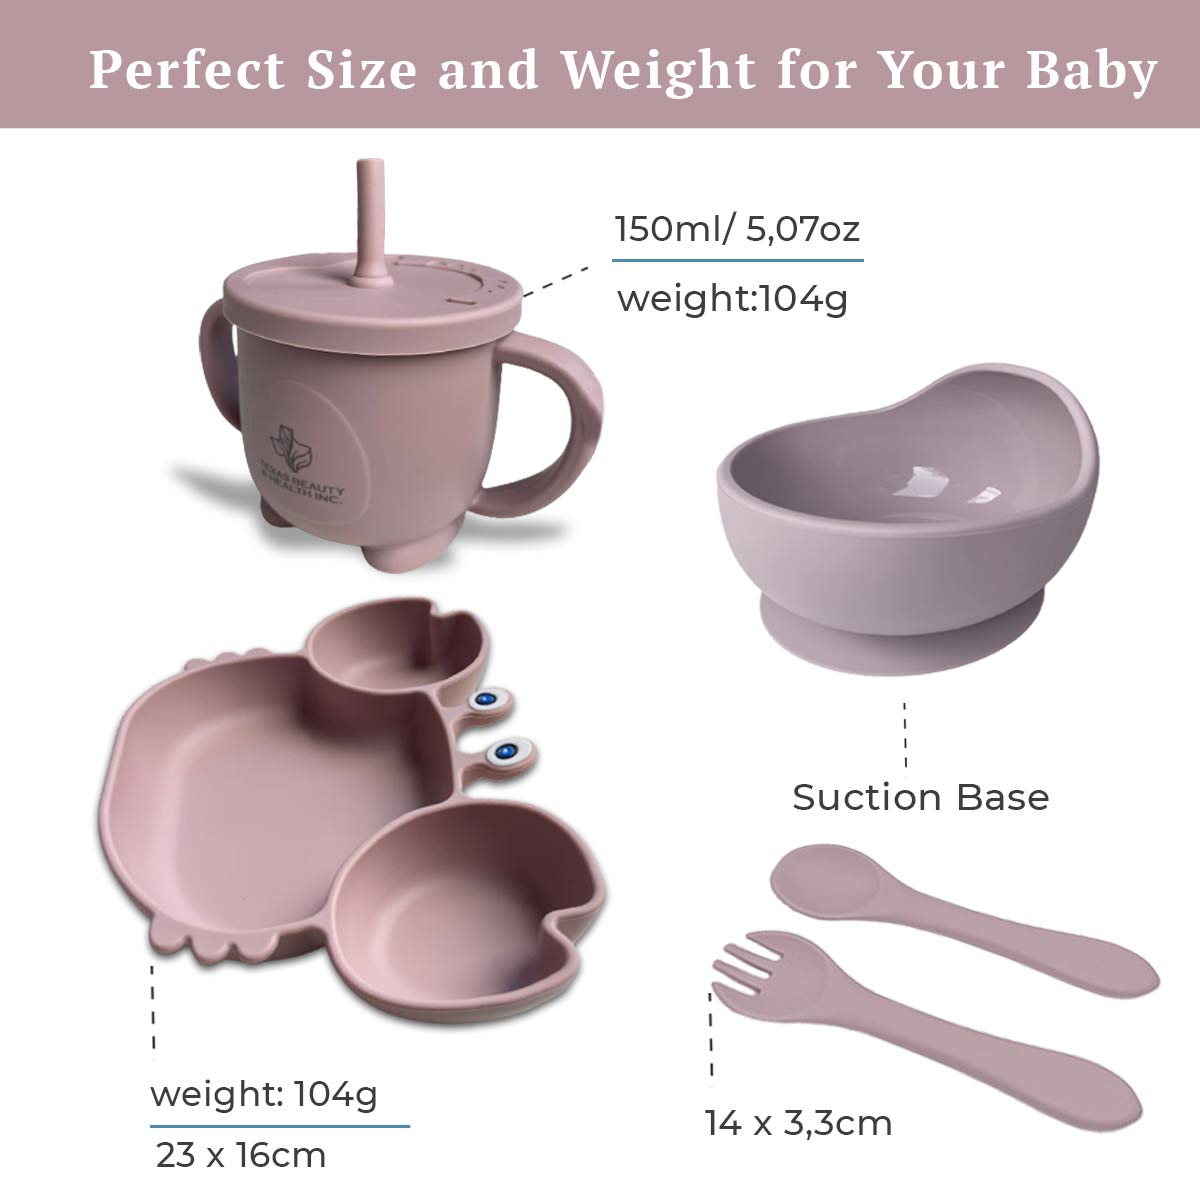 Texas Beauty & Health Rainbow Unicorn Dreams | Light Pink Silicone Baby Feeding Set for Girls | Suction Bowl, Divided Plate, Bib, Cup, Spoon, and Fork